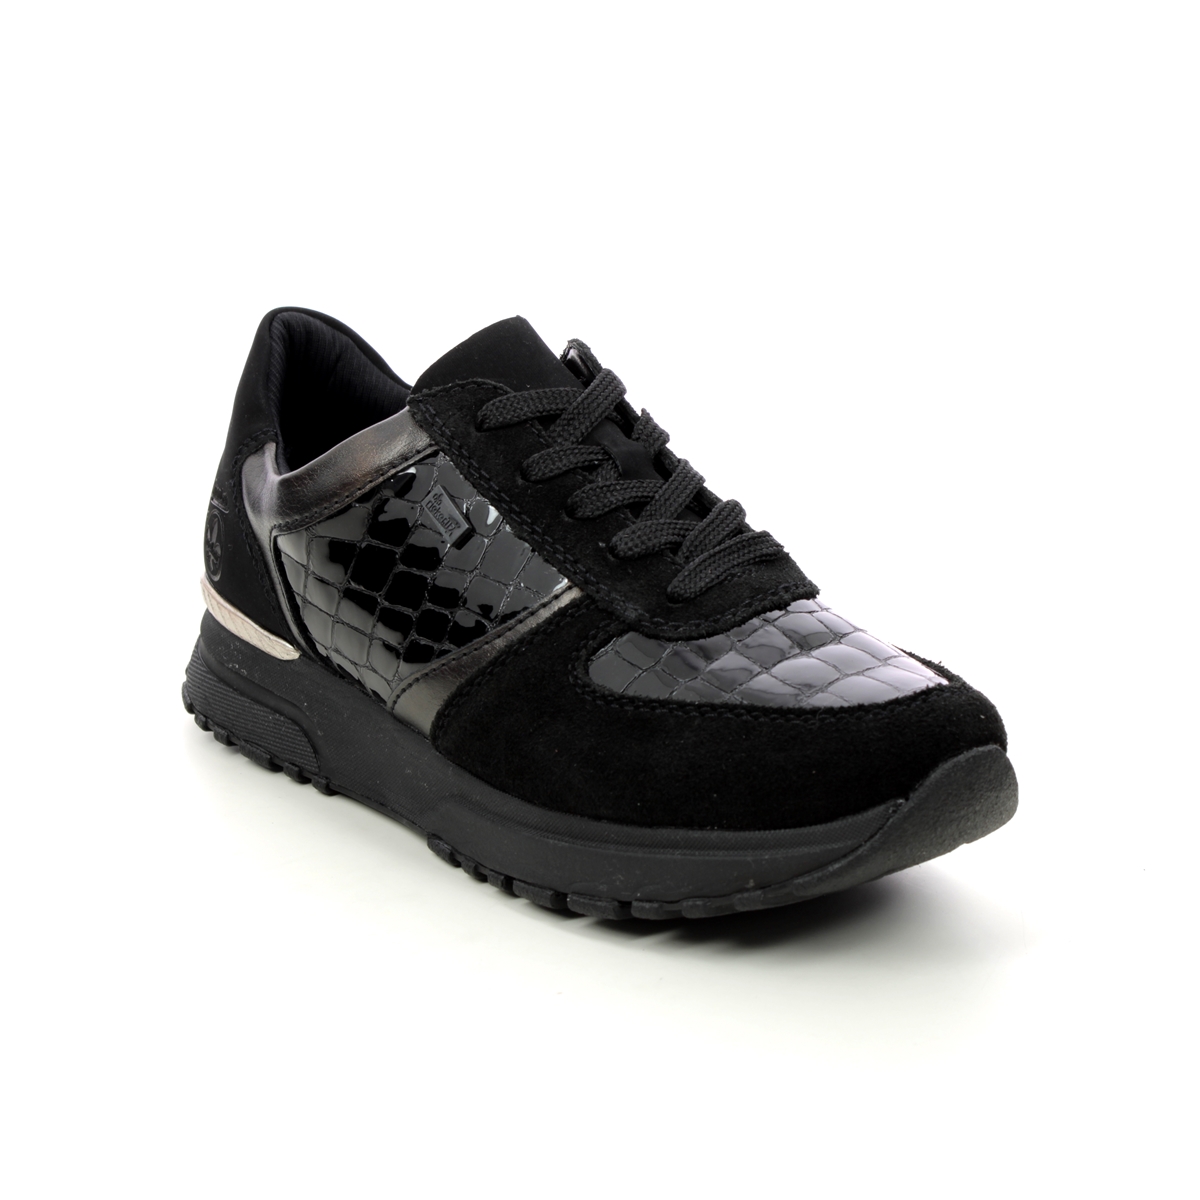 Rieker Govicroc Effect Black Patent Suede Womens Trainers N7412-00 In Size 37 In Plain Black Patent Suede